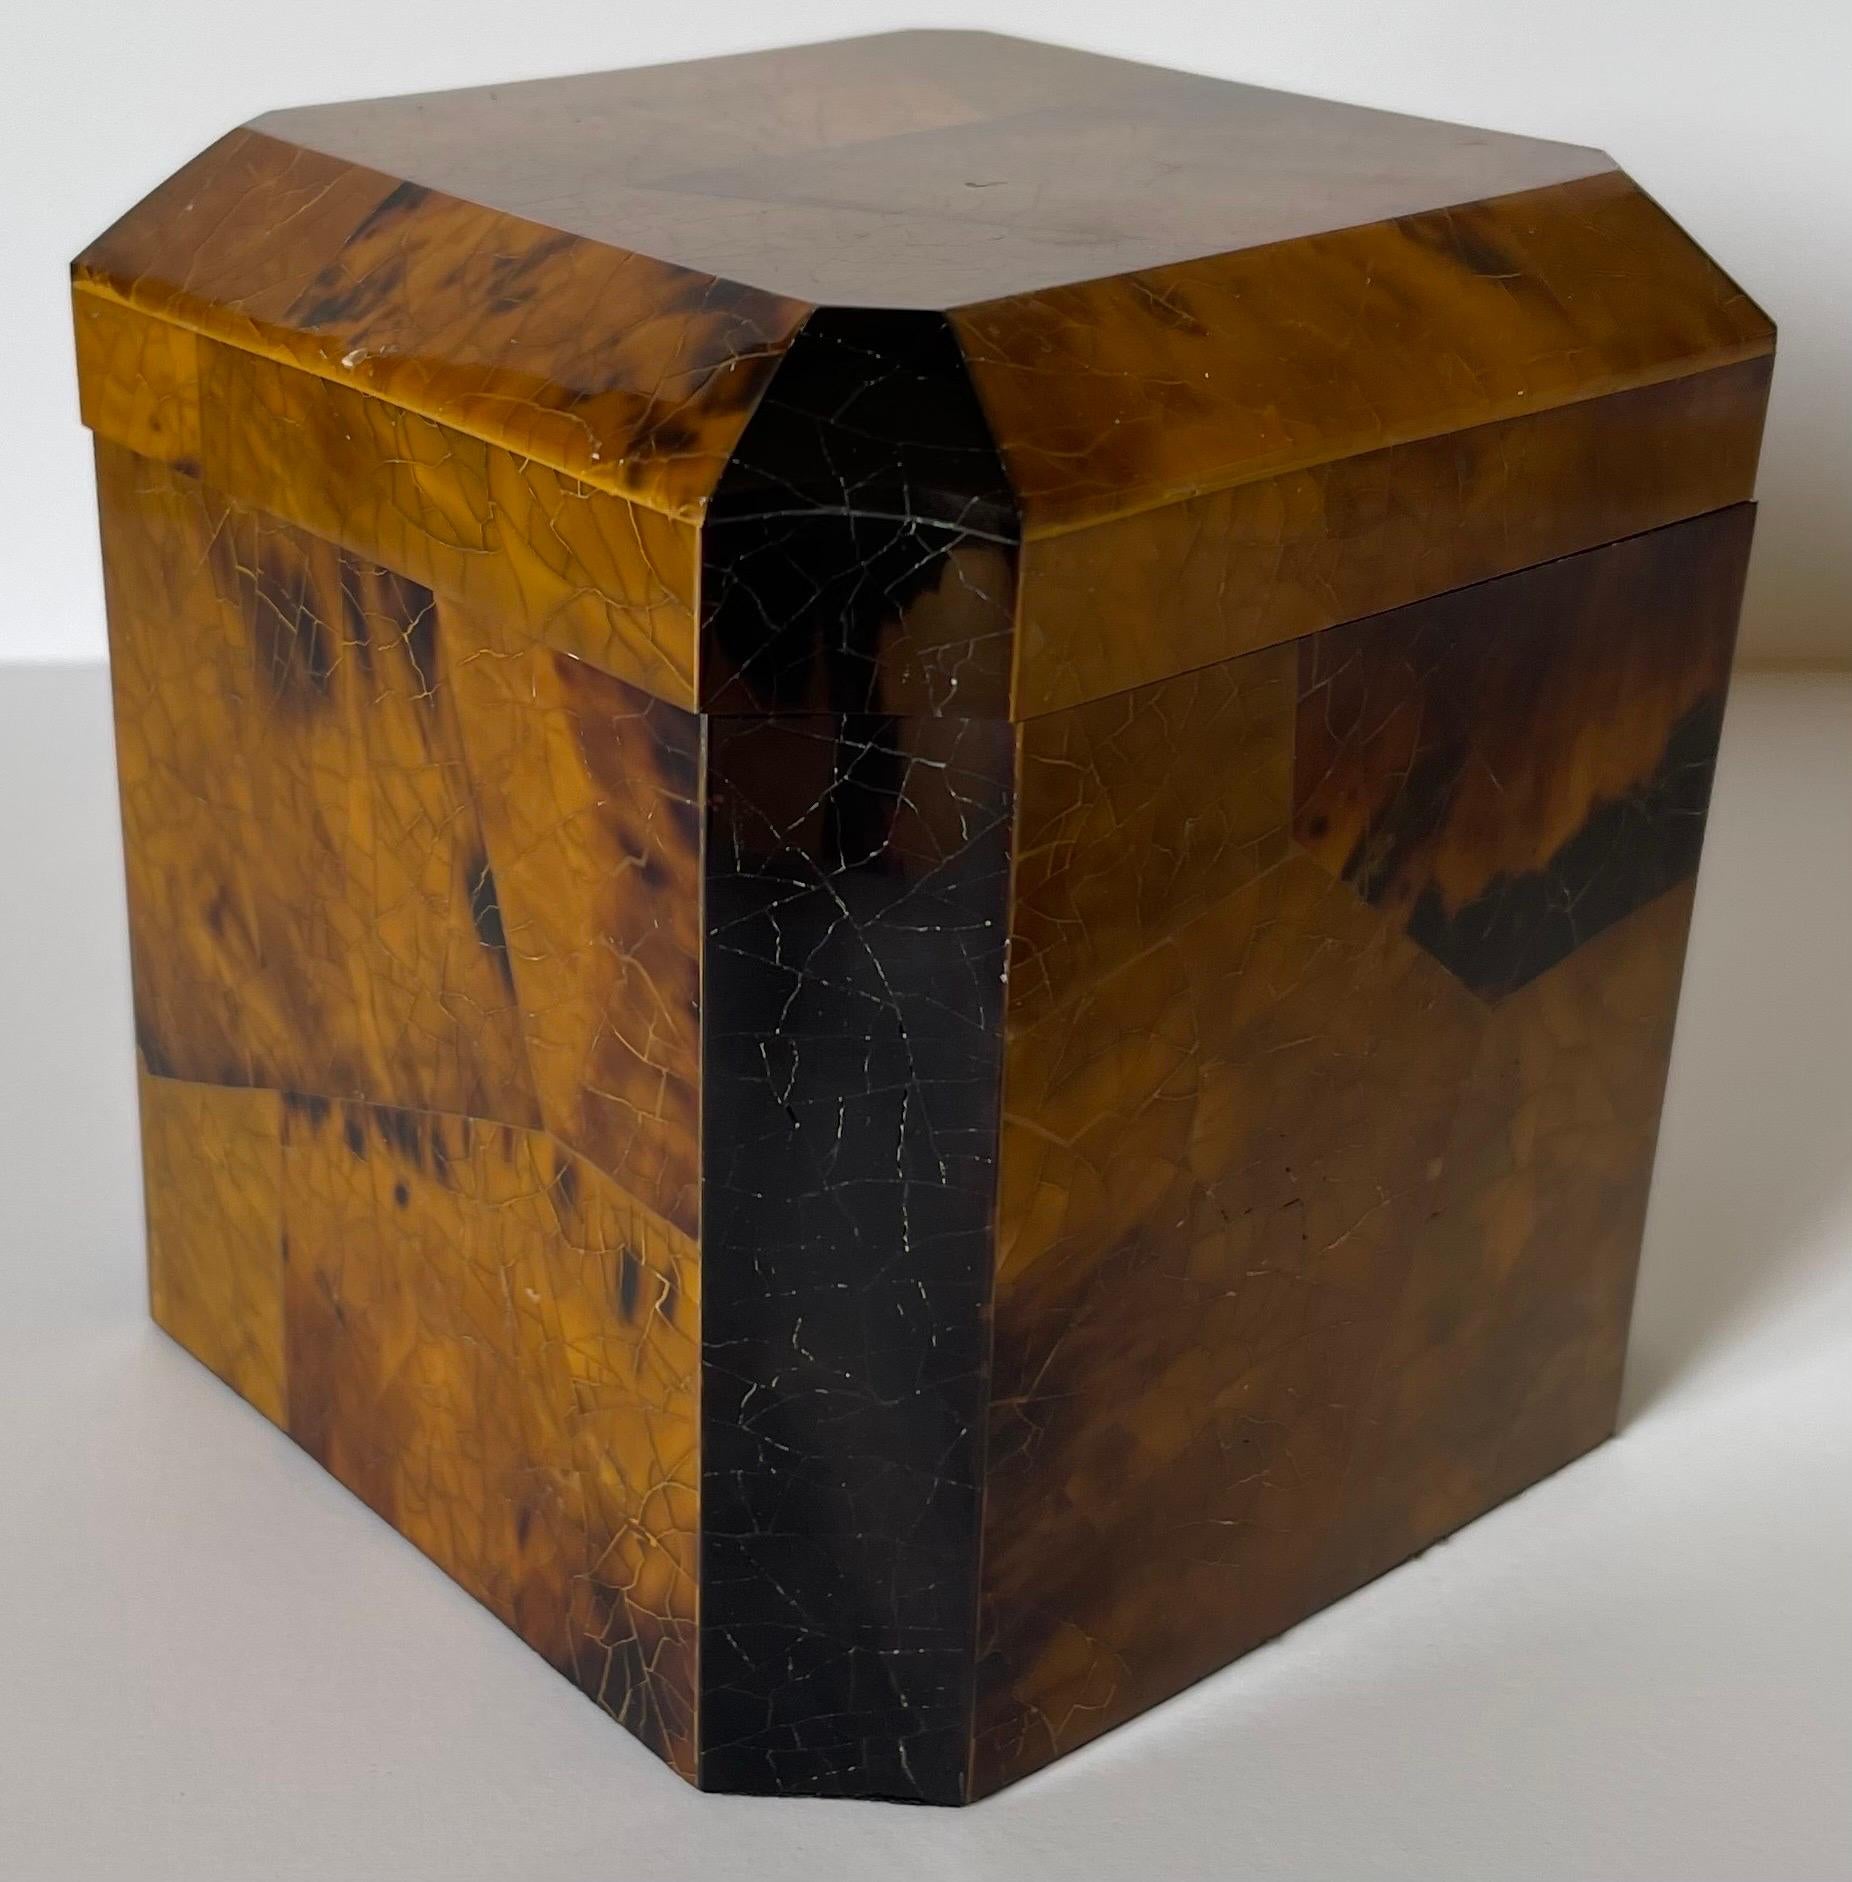 1980s decorative pen shell cube box attributed to Maitland Smith. Medium brown pen shell with dark gray tessellated stone accents. Wood lined box. No makers mark or signature.